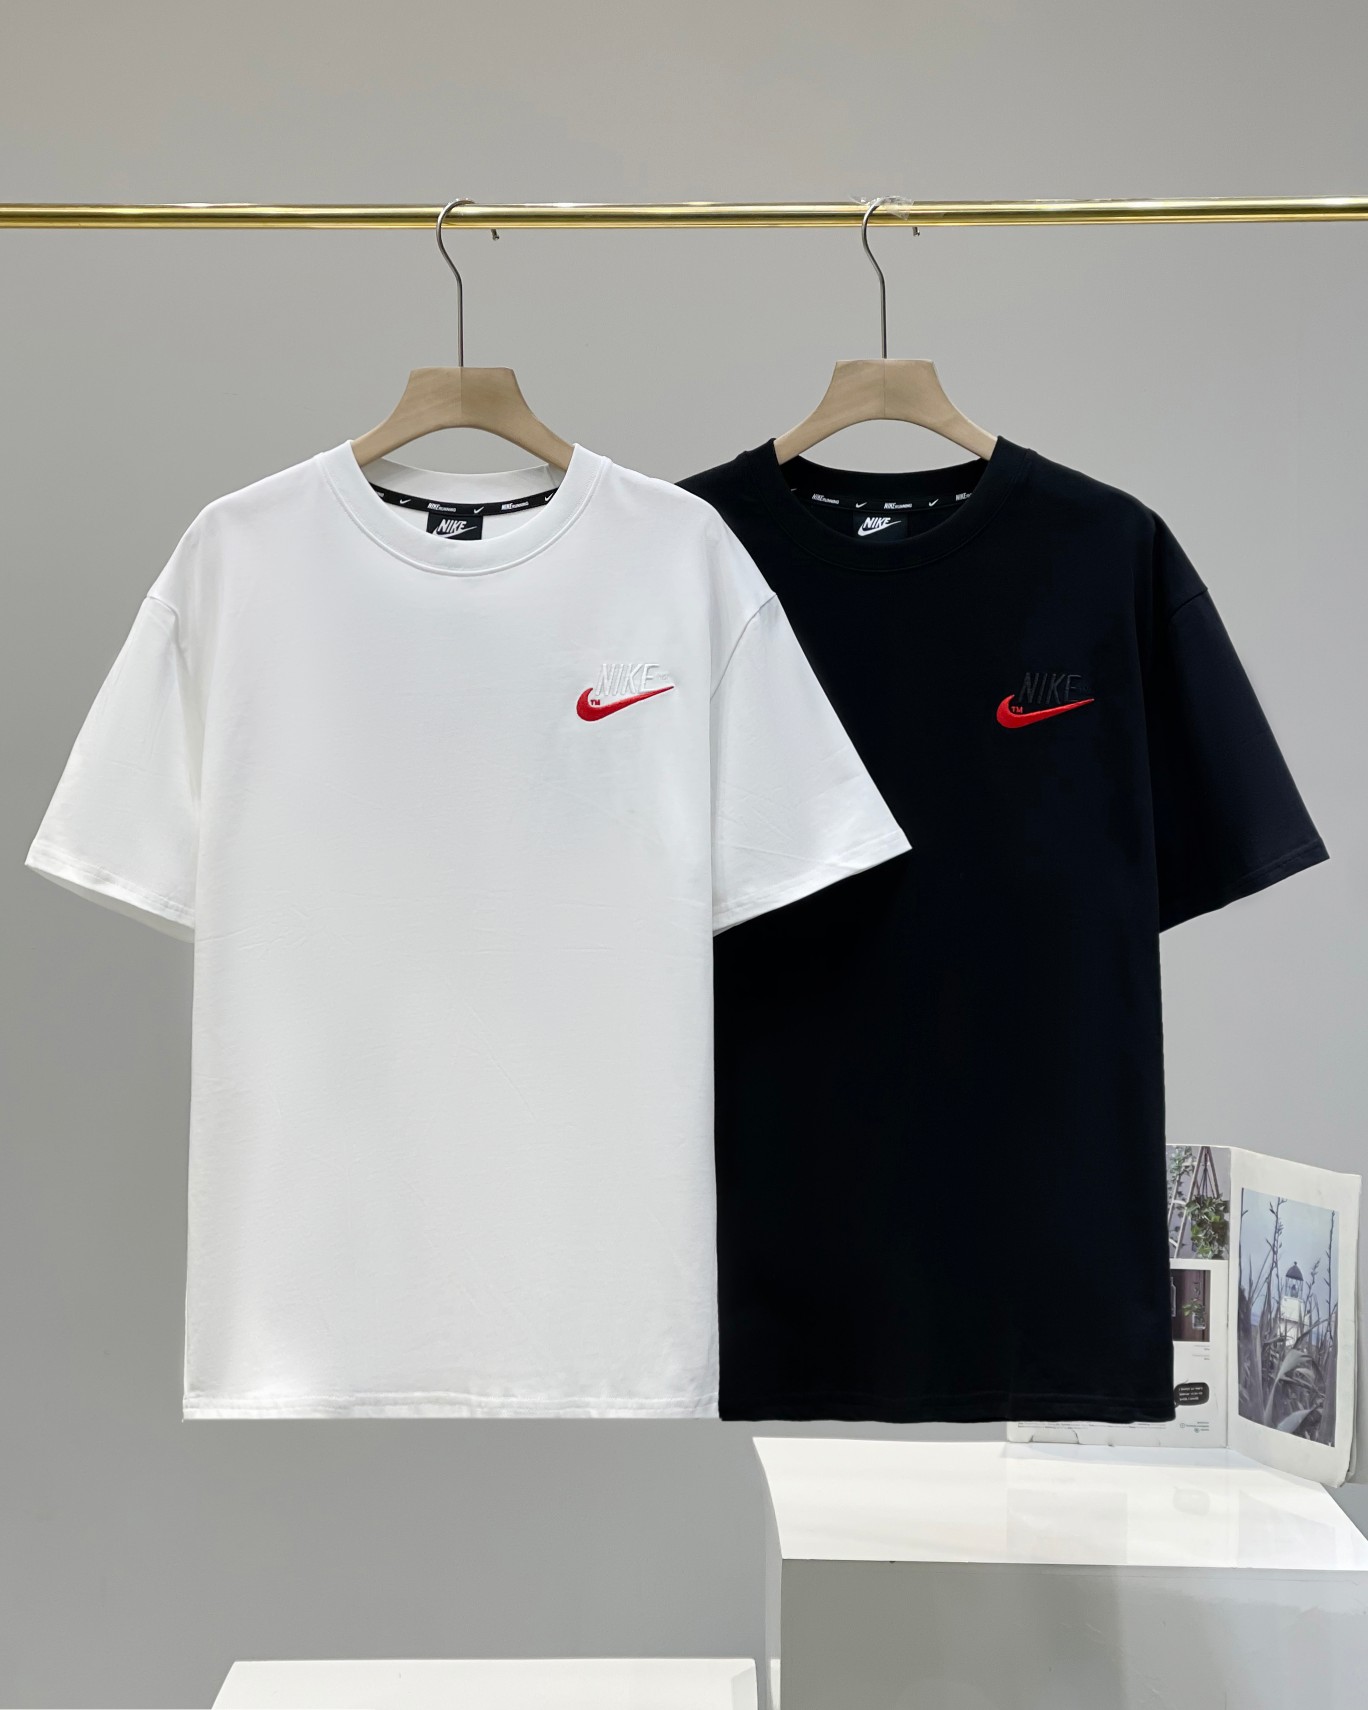 Buy Cheap
 Nike Clothing T-Shirt Black White Splicing Unisex Men Cotton Double Yarn Summer Collection Fashion Casual